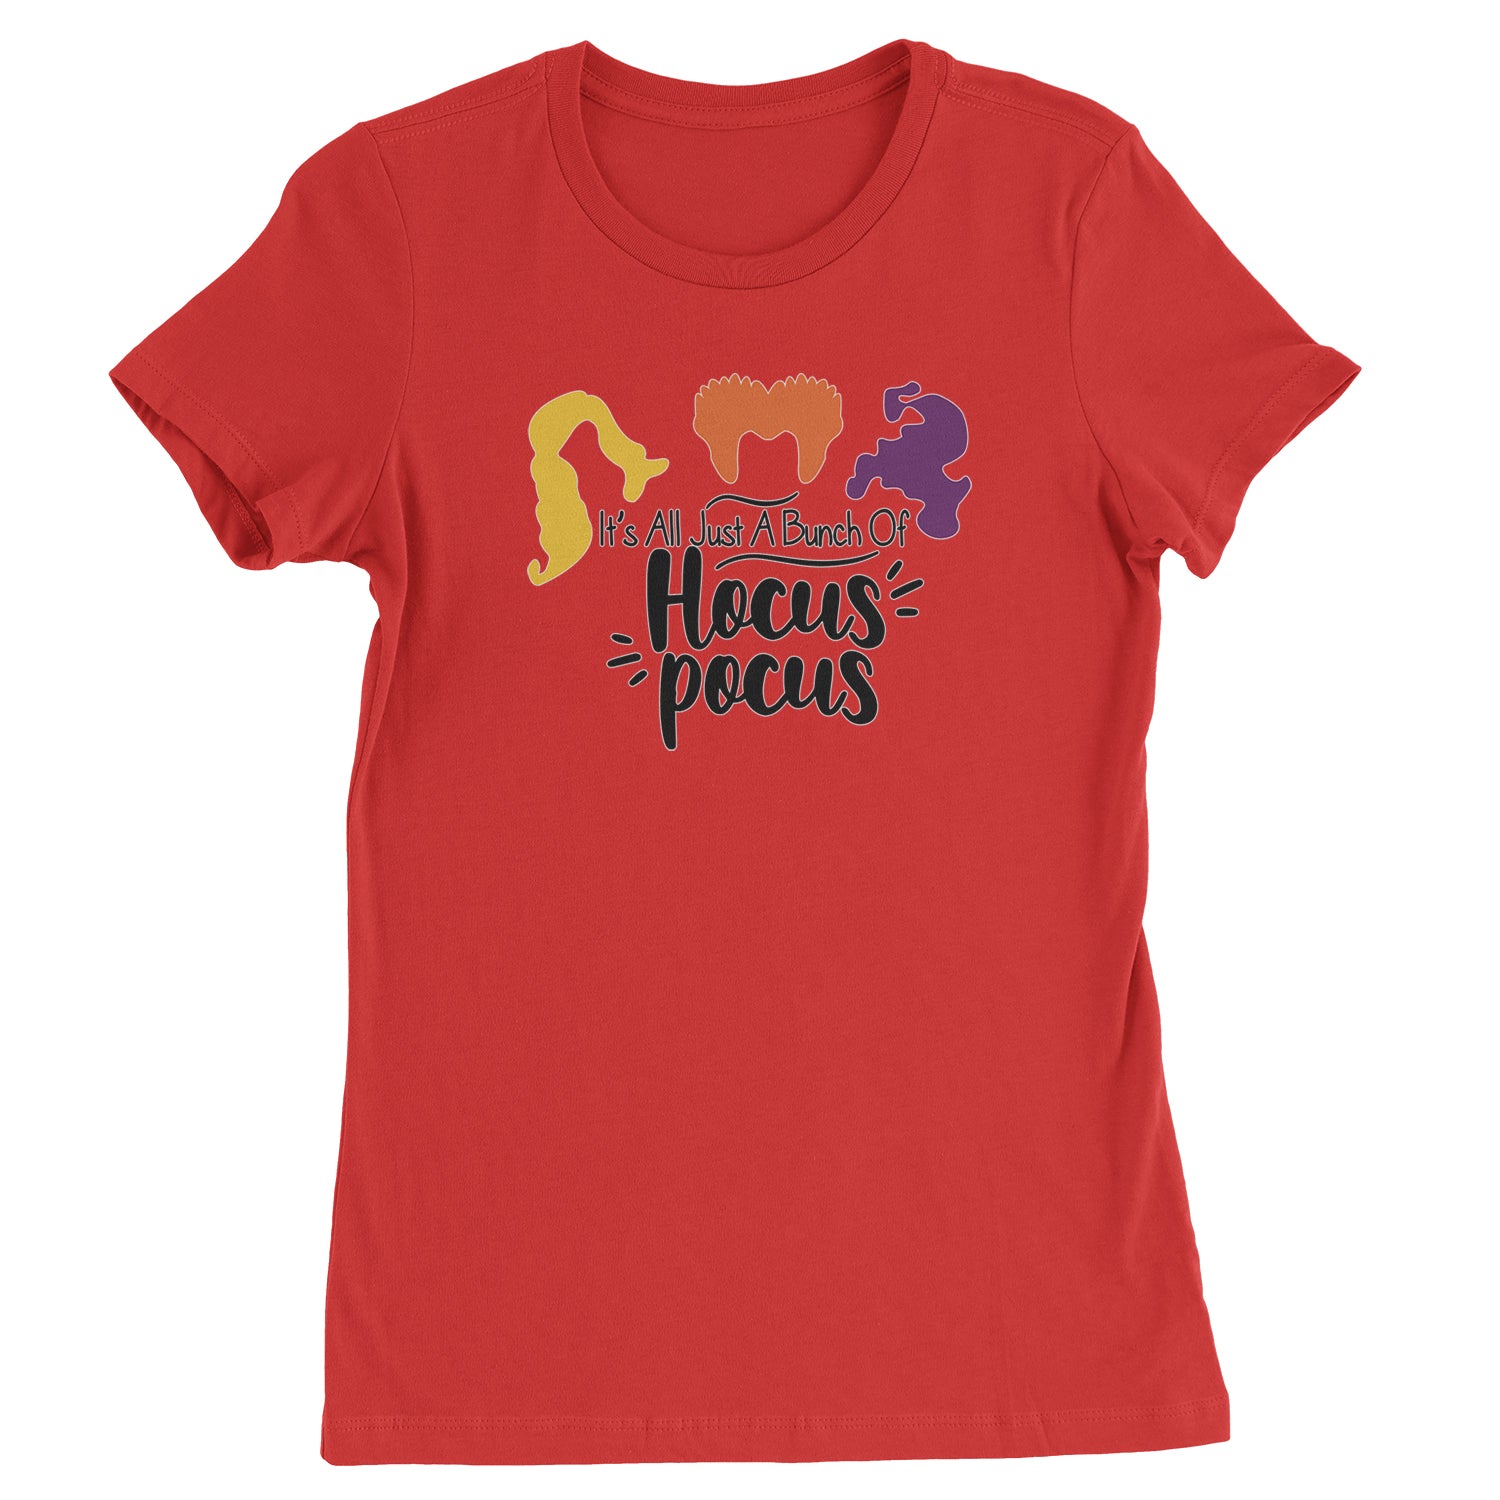 It's Just A Bunch Of Hocus Pocus Womens T-shirt descendants, enchanted, eve, hallows, hocus, or, pocus, sanderson, sisters, treat, trick, witches by Expression Tees